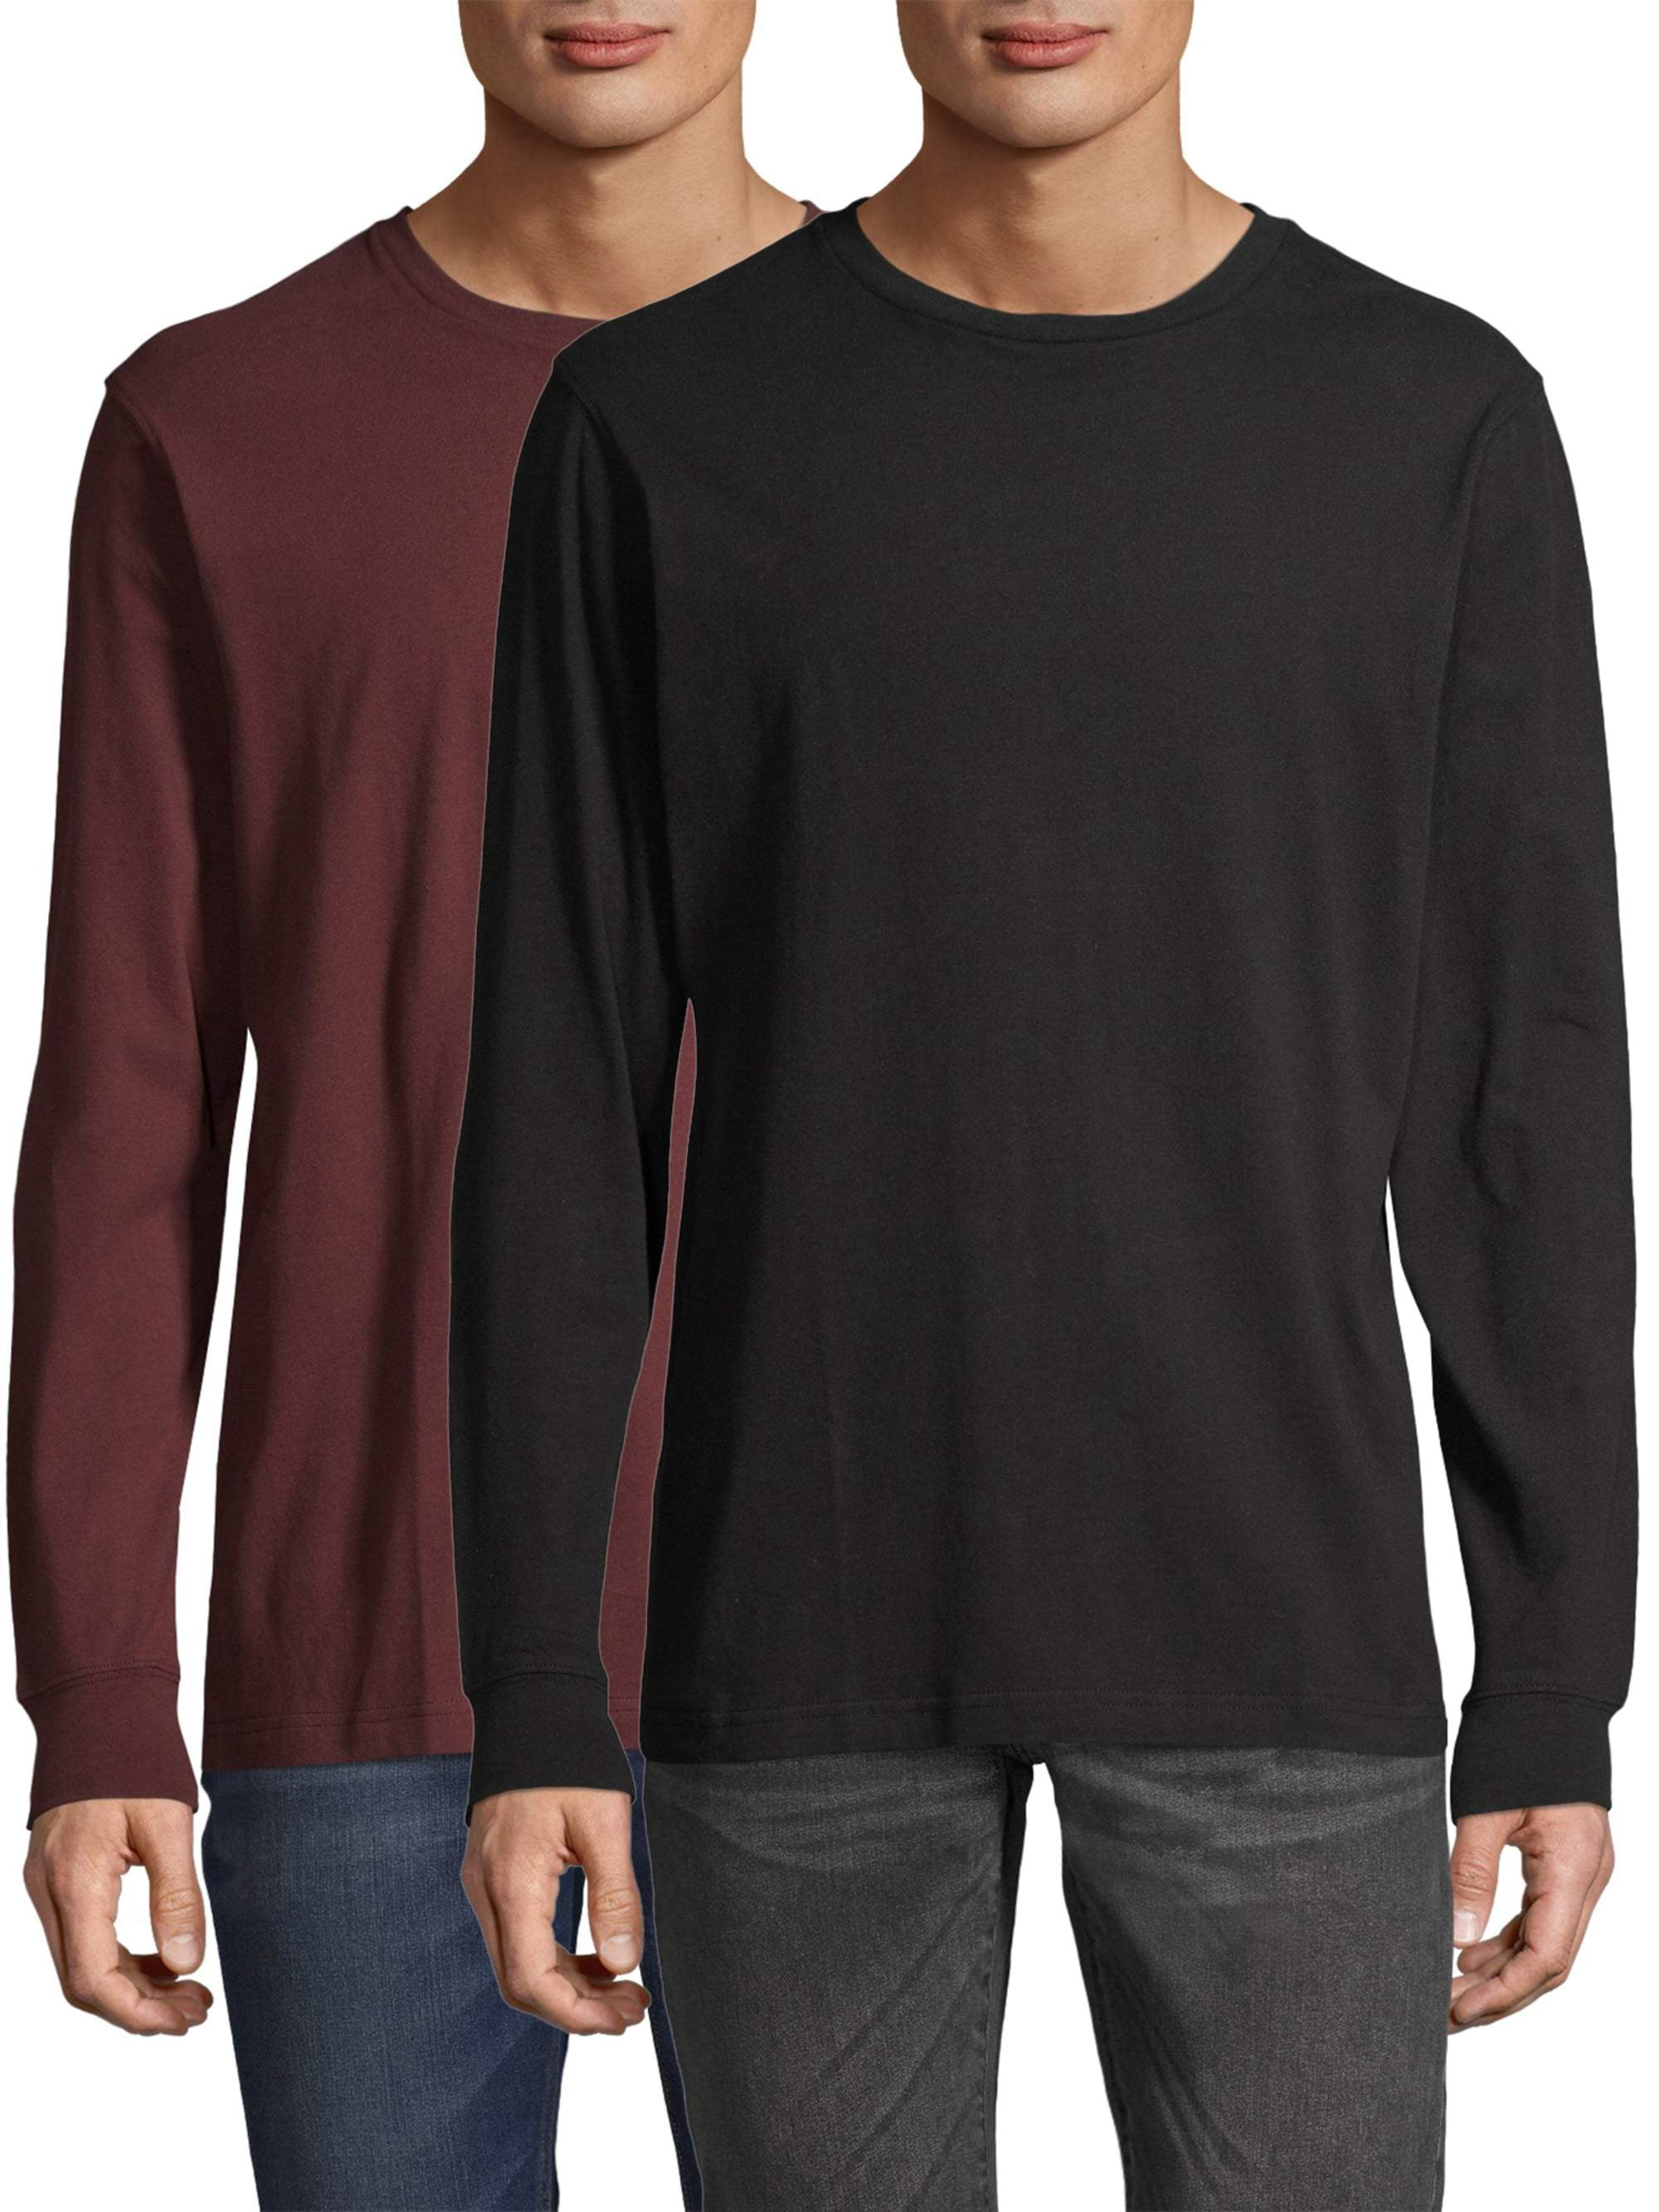 GEORGE - George Men's and Big Men's Long Sleeve Cotton Crew T-Shirt - 2 ...